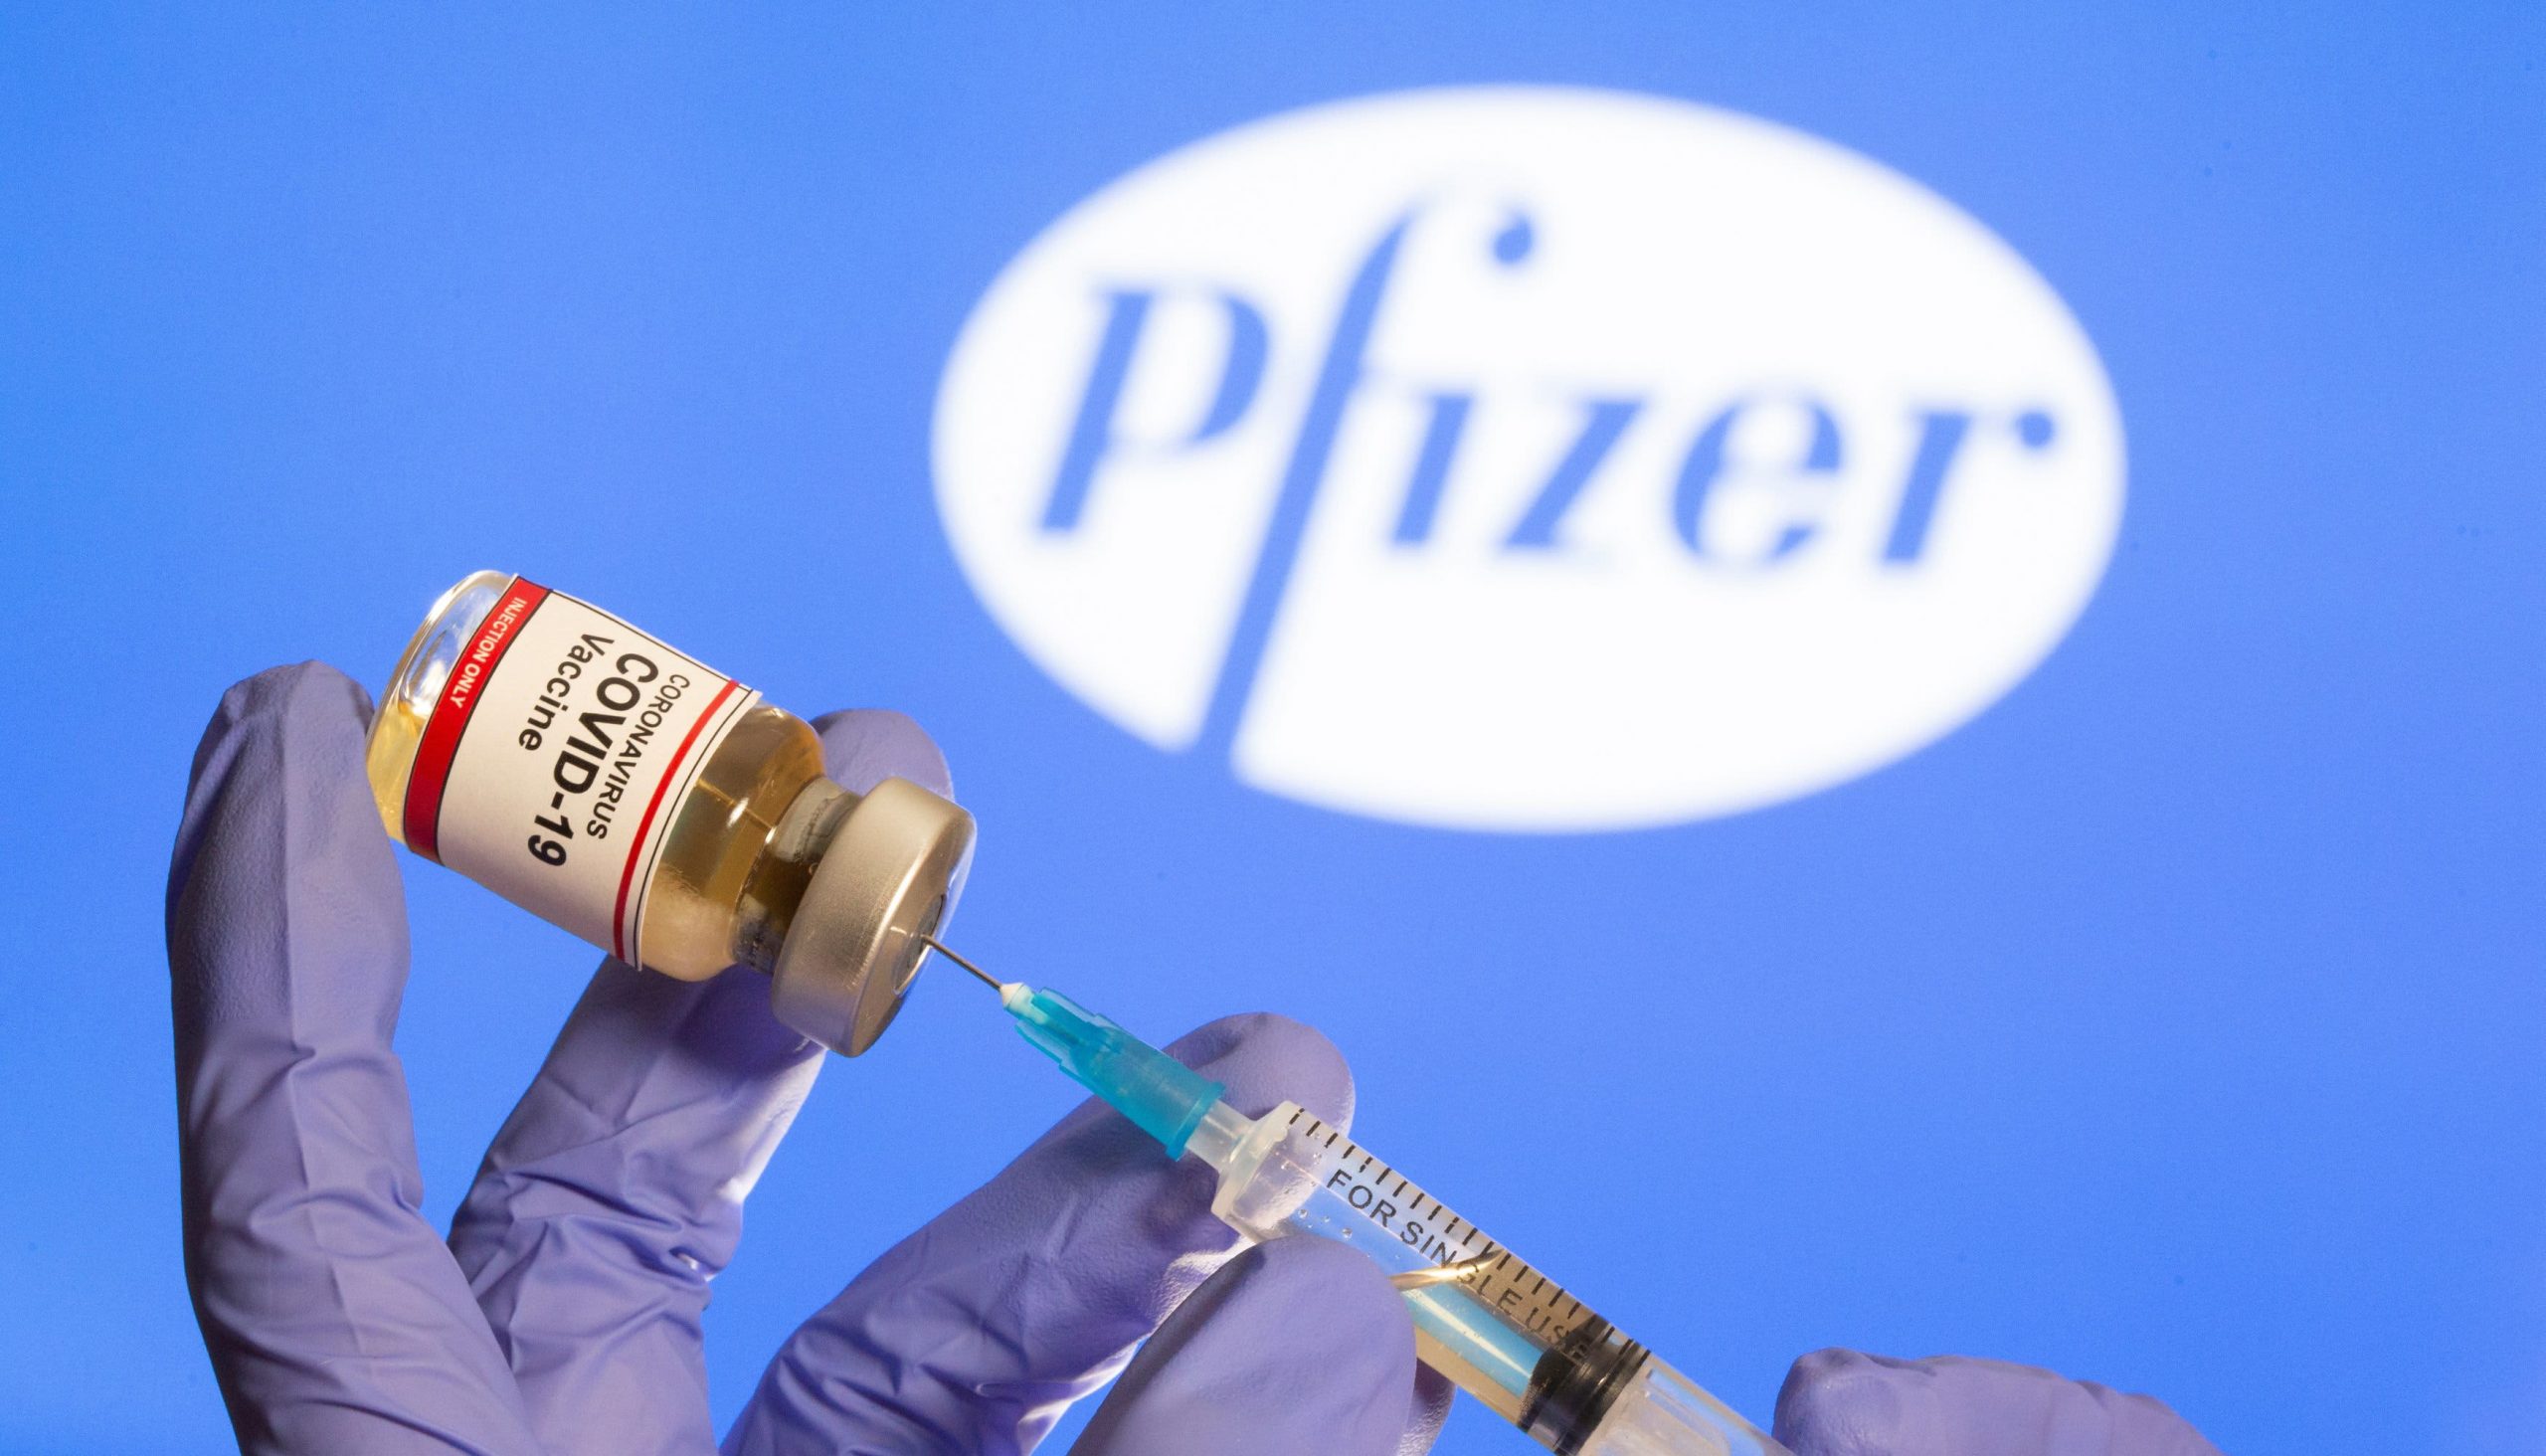 FDA approves Pfizer's Covid vaccine for emergency use as U.S. reaches pivotal moment in the pandemic